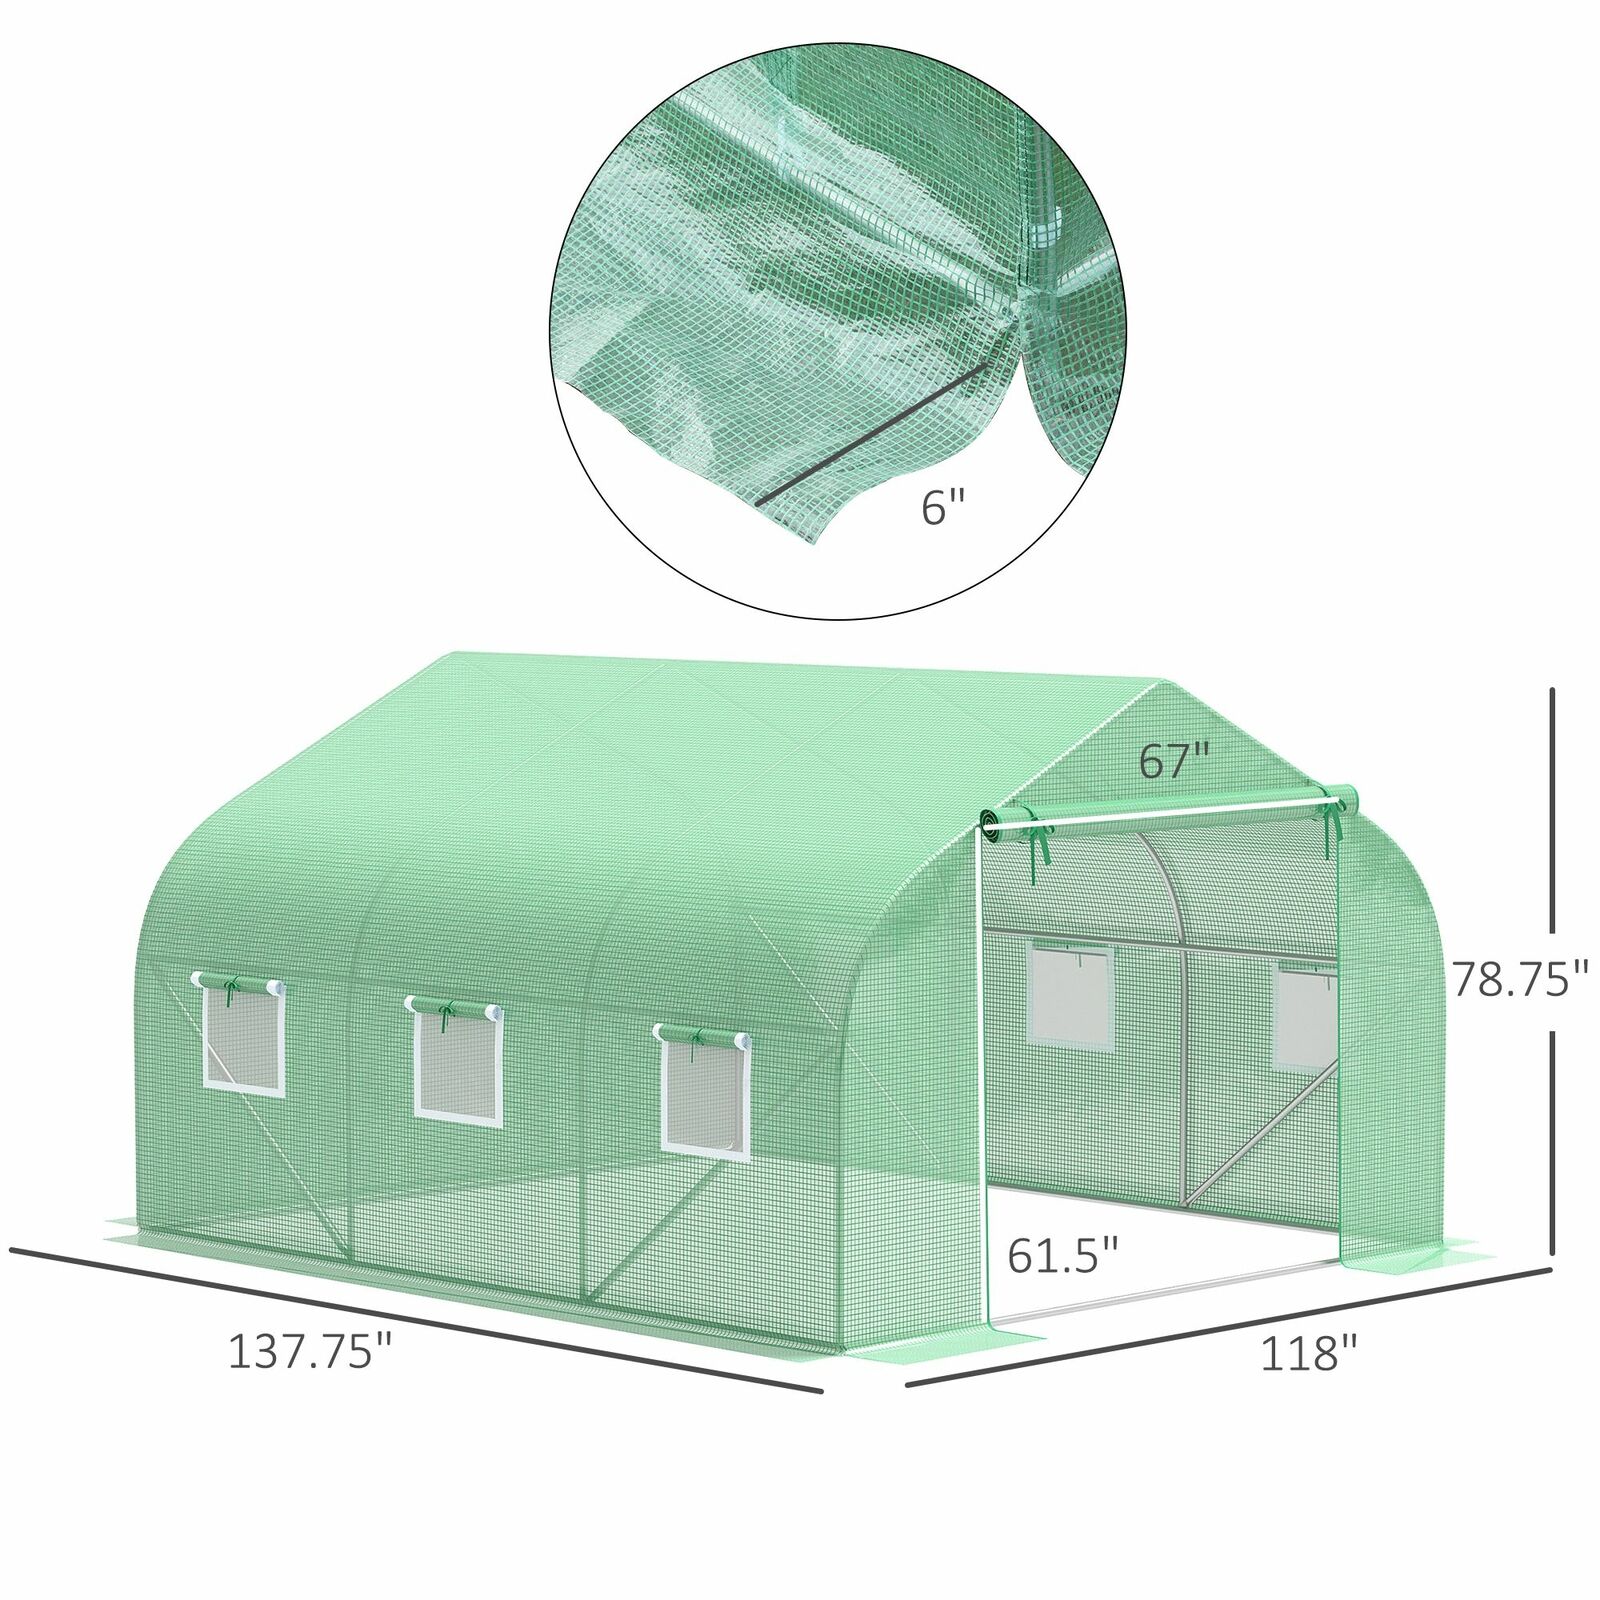 Image 2 - Greenhouse 12&#039; x 10&#039; x 7&#039; Large Portable Walk-in Hot Green House Plant Gardening